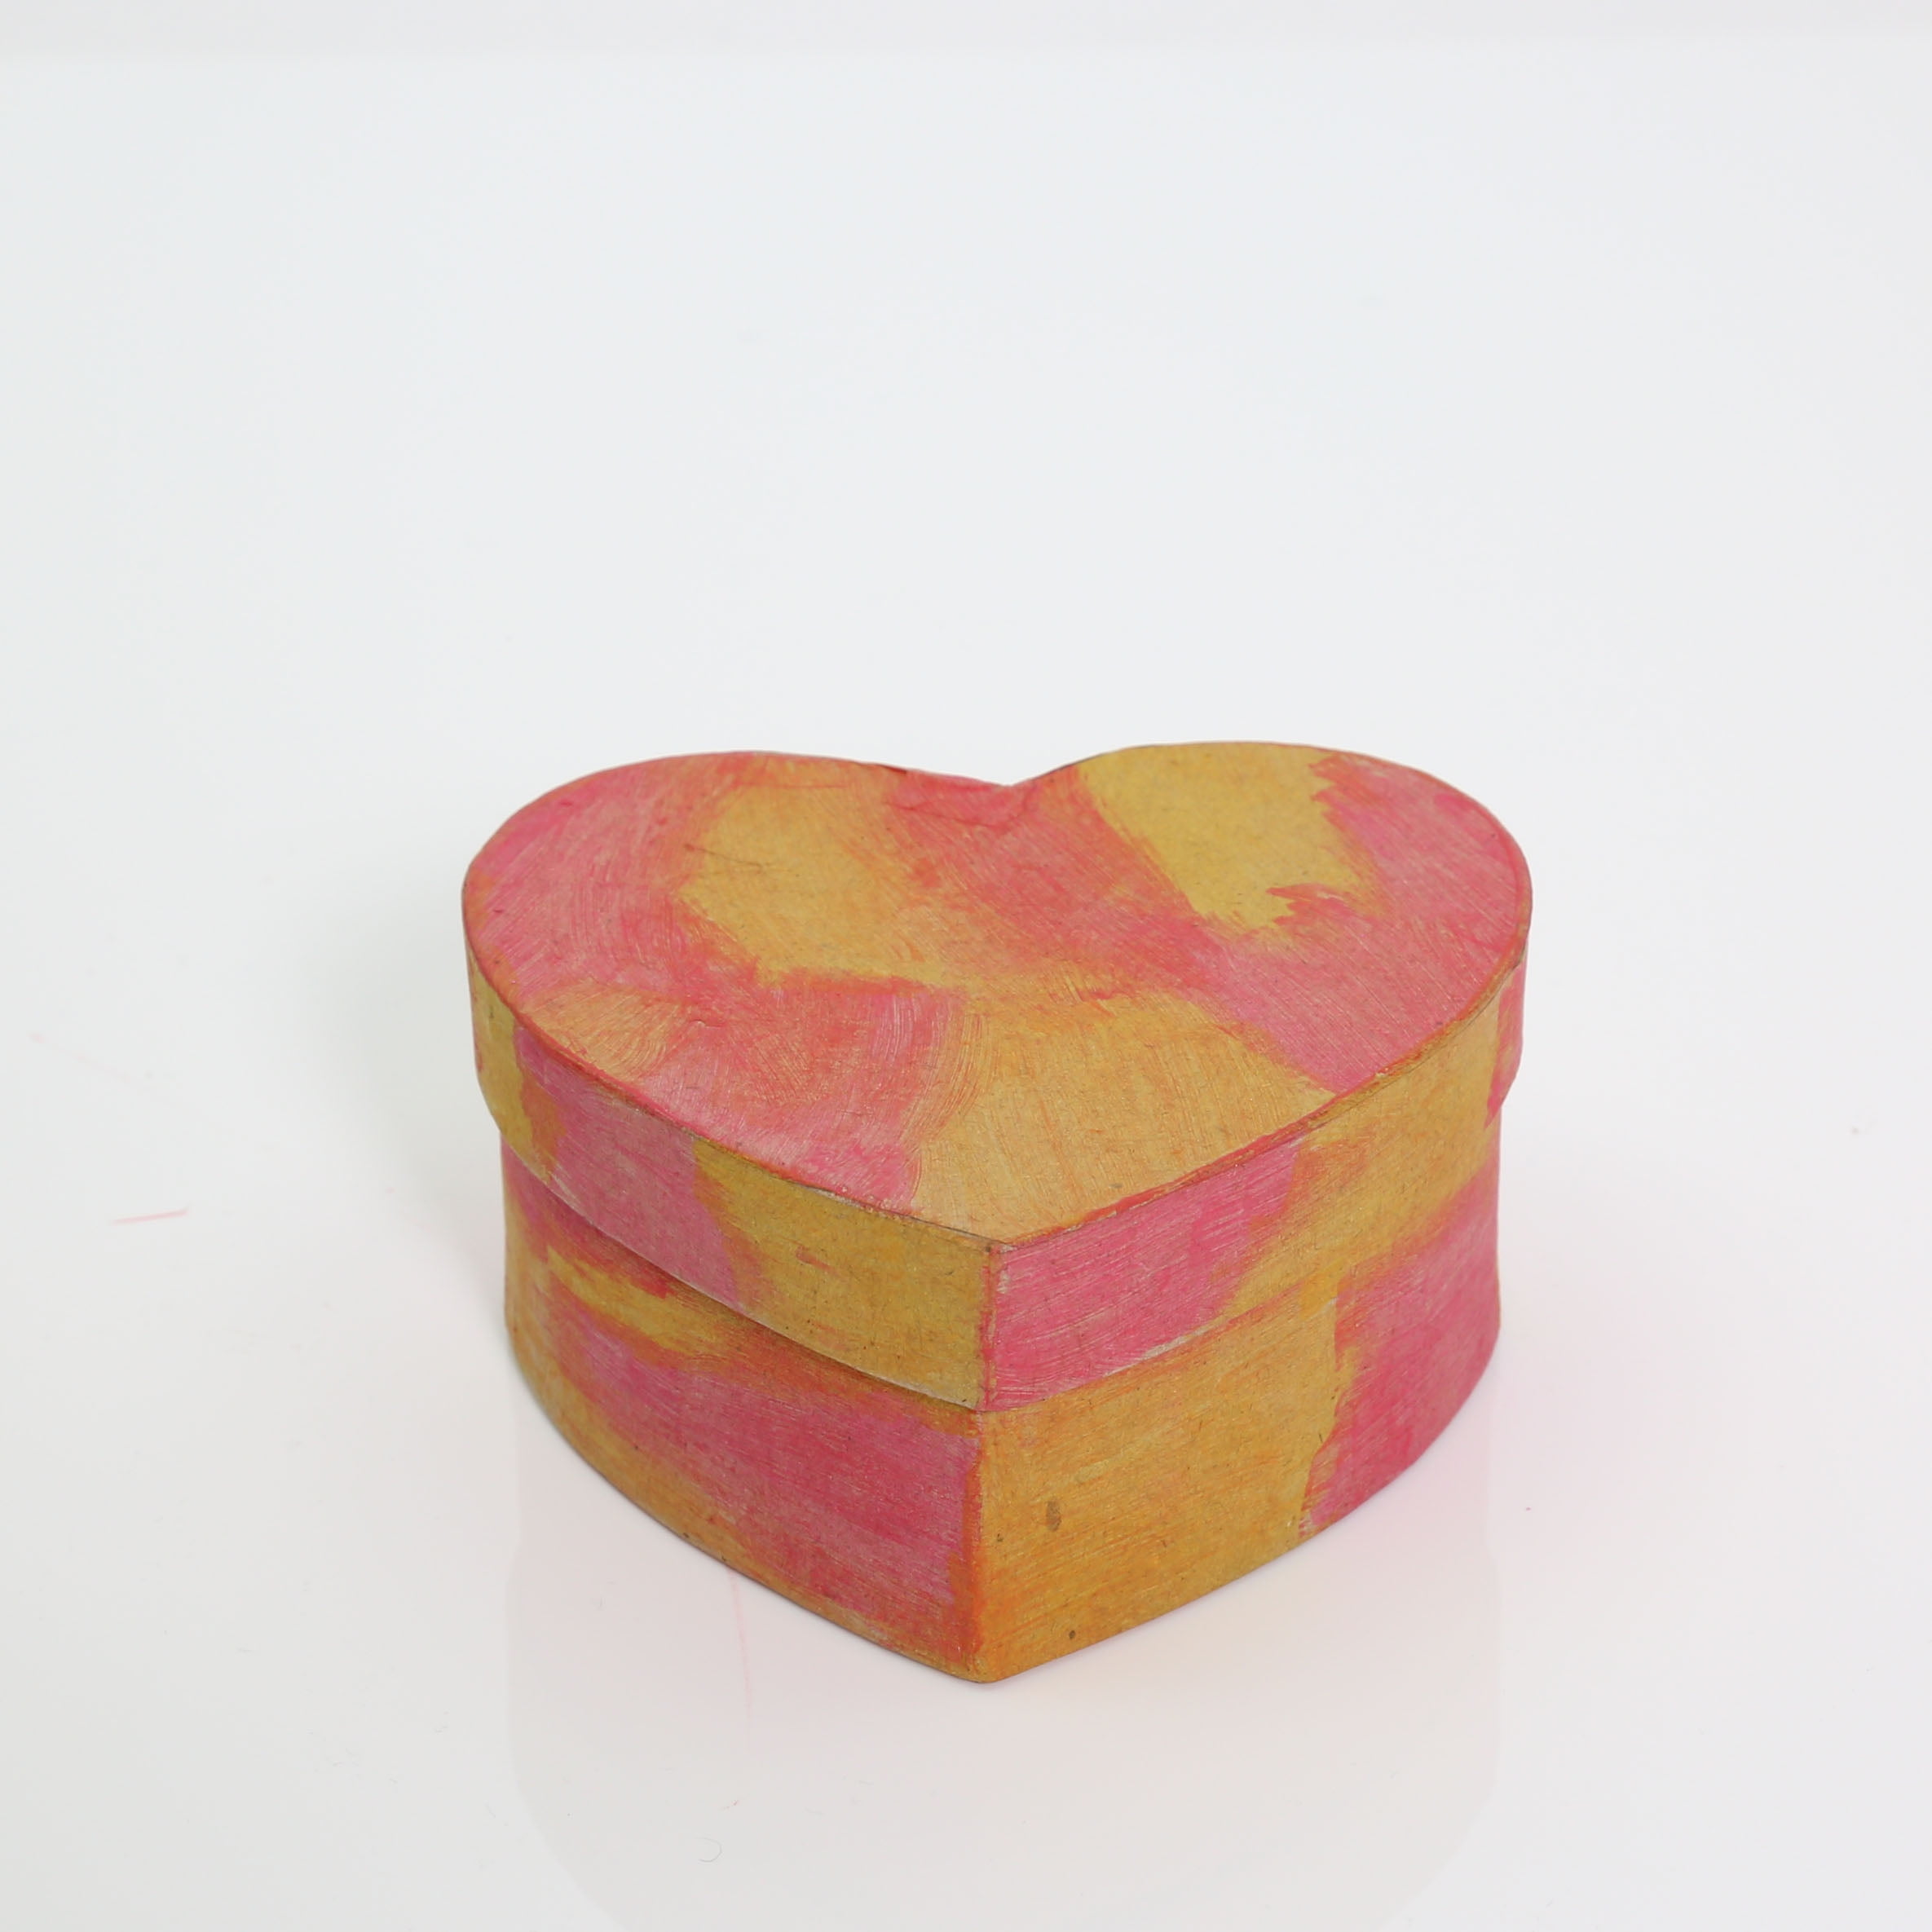 Paper Mache Heart Shaped Box - (7-1/2 x 7-1/2) Heart Shaped Papier Mache  Cardboard Box with Lid - DIY Ready to Decorate for Valentine's Day or  Everyday Craft Projects Heart 7-1/2